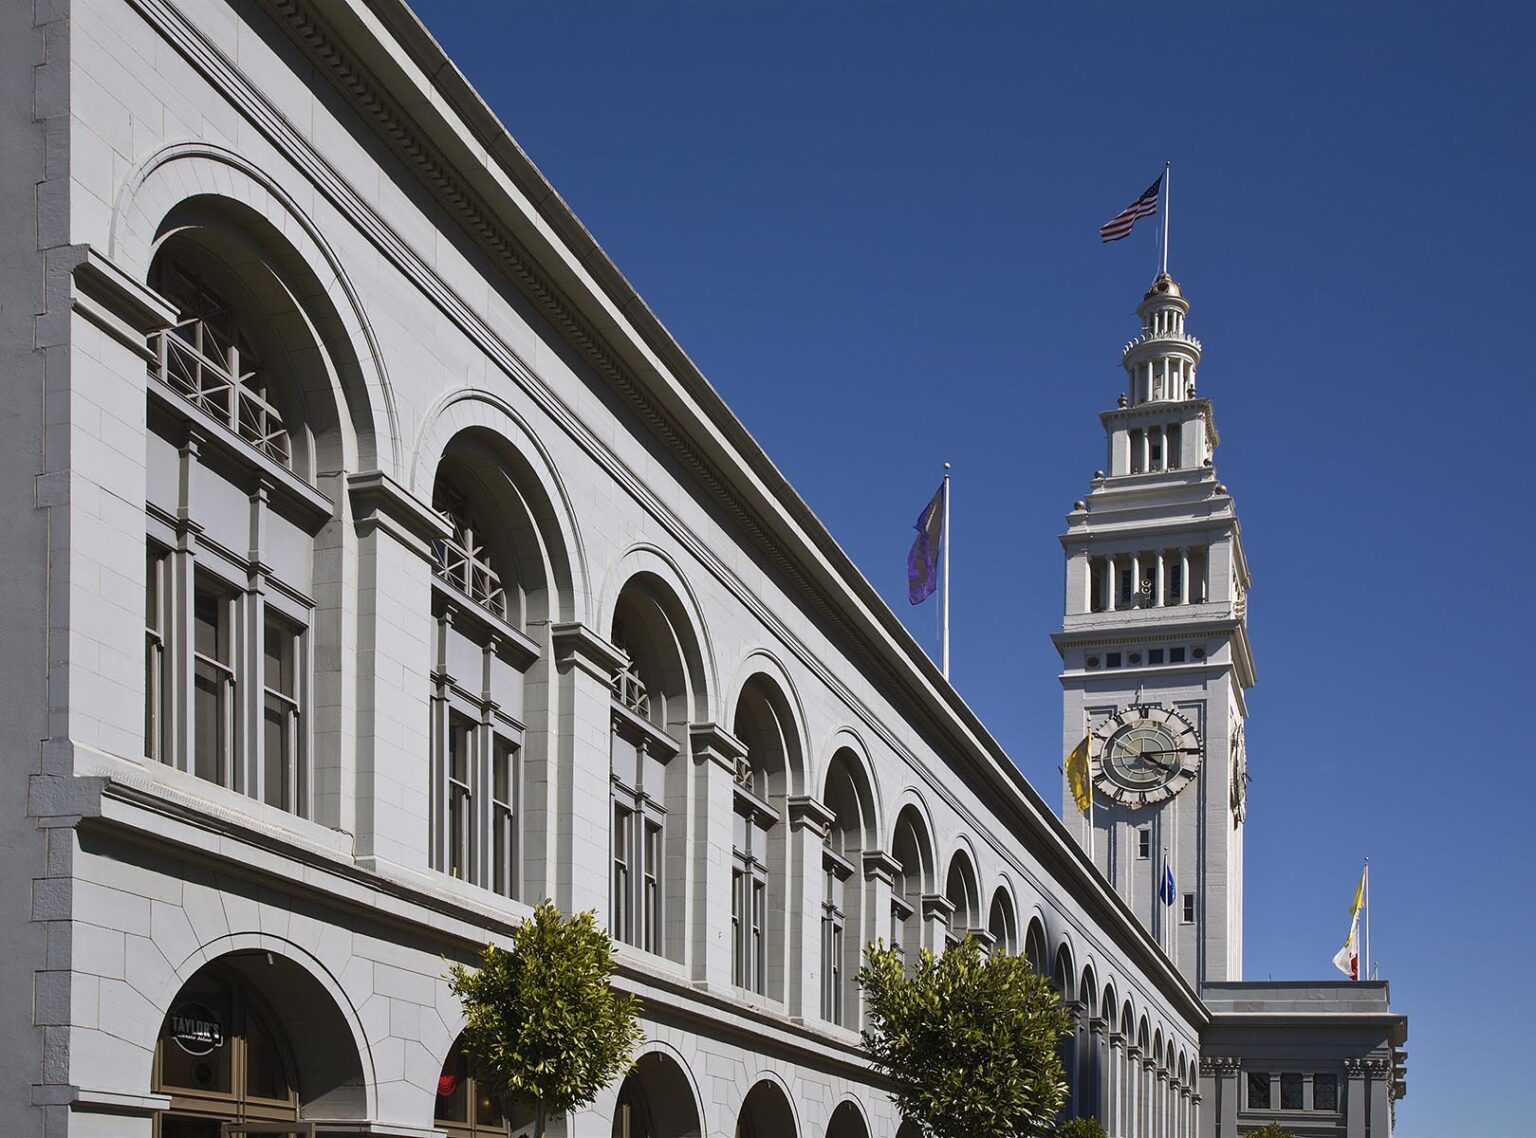 The FERRY BUILDING MARKETPLACE at THE EMBARCADERO - SAN FRANCISCO, CALIFORNIA